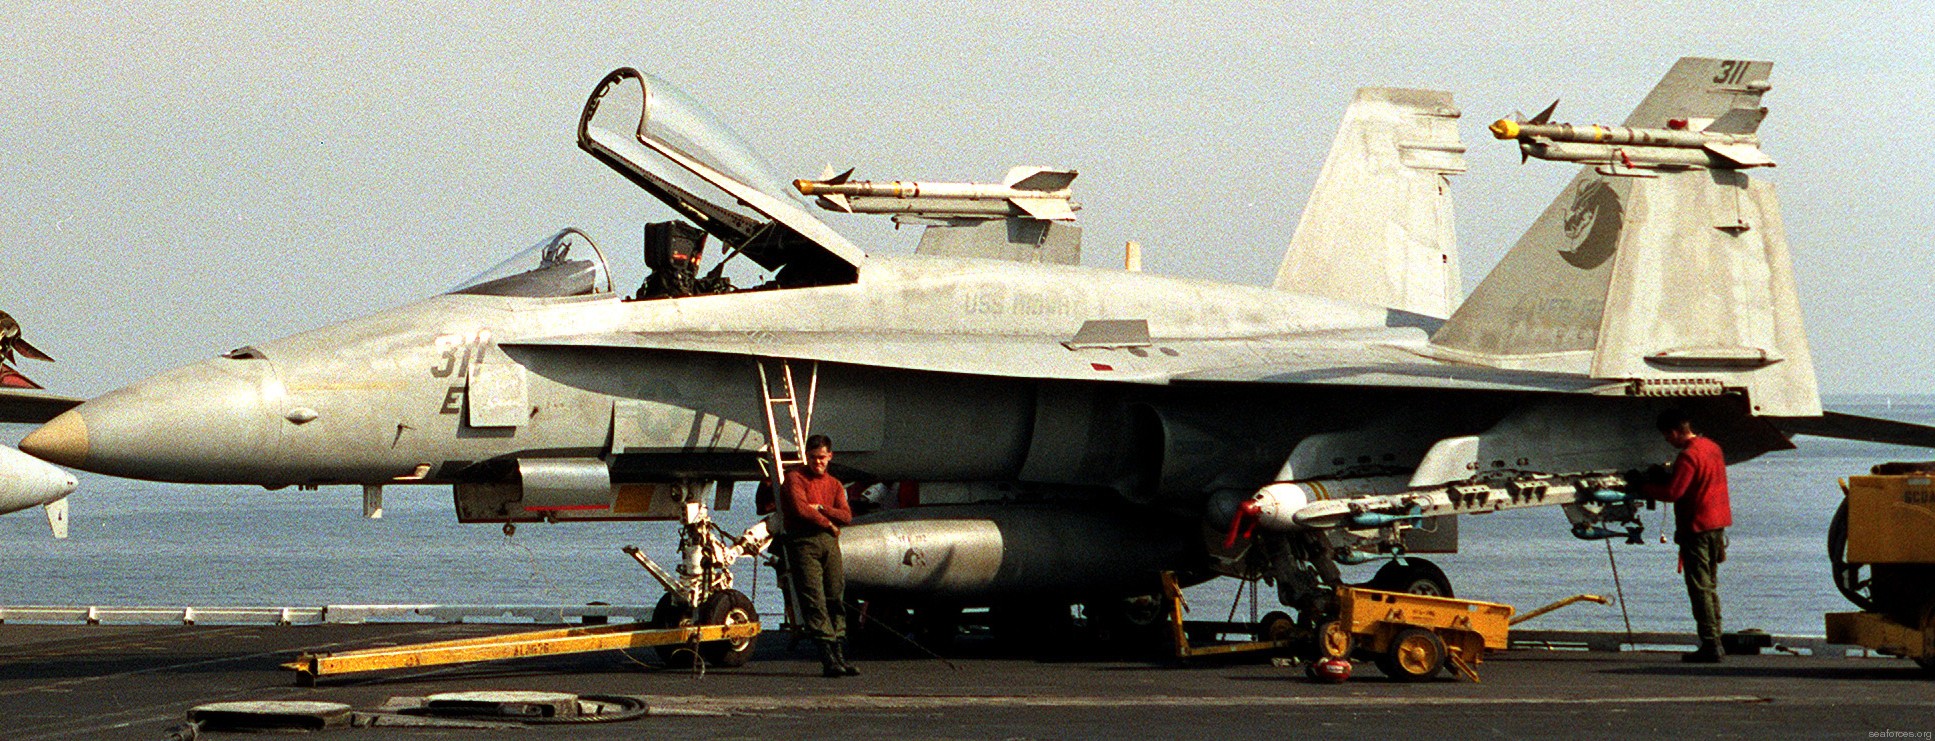 vfa-192 golden dragons strike fighter squadron navy f/a-18a hornet carrier air wing cvw-5 uss midway cv-41 86